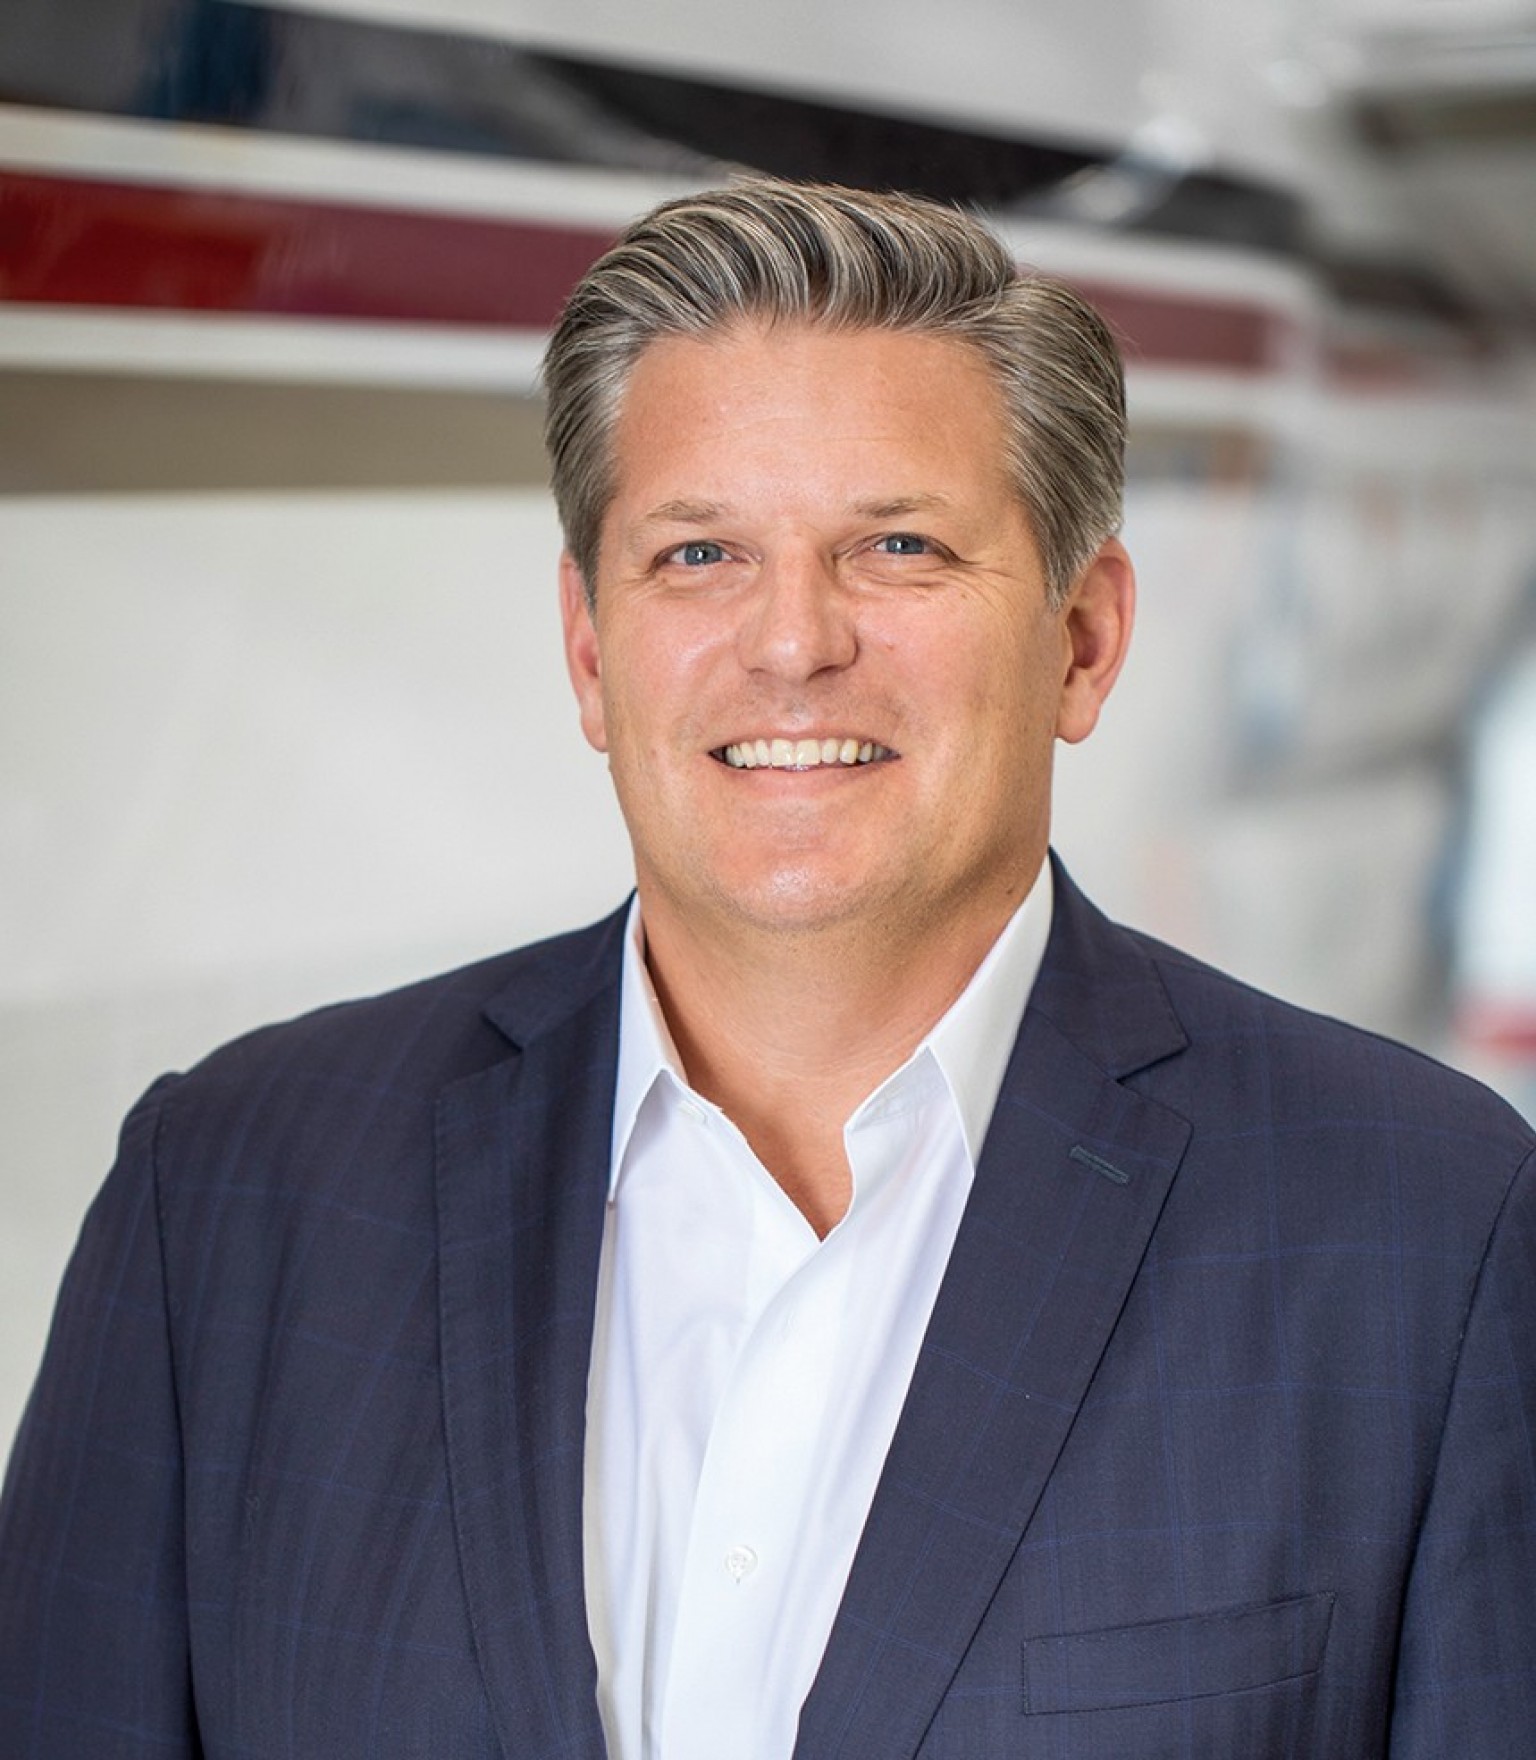 Patrick Gallagher, NetJets’ President of Sales, Service and Marketing